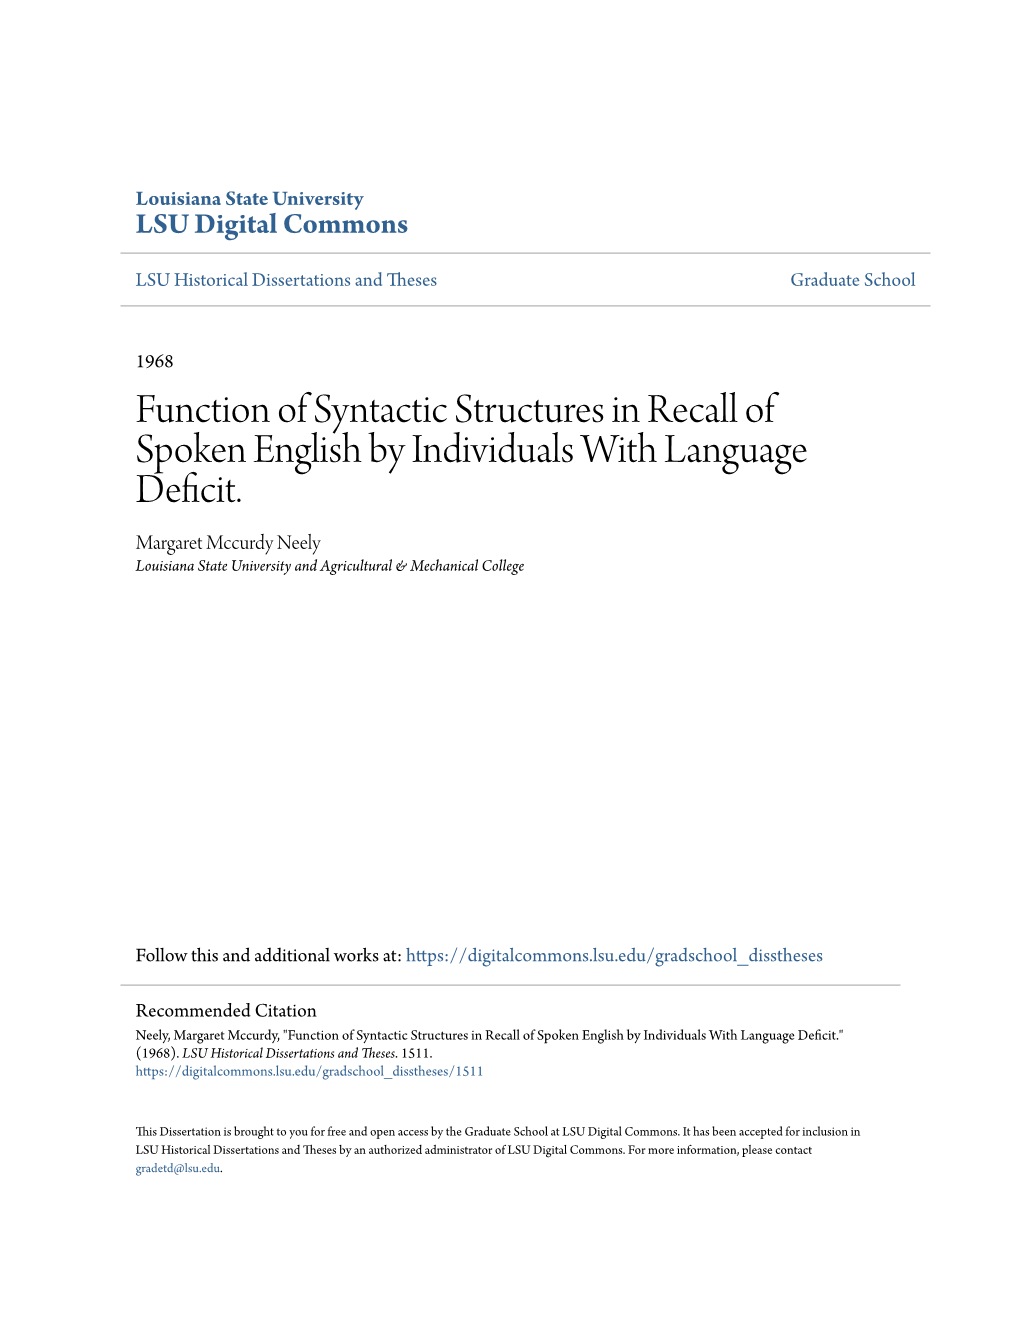 Function of Syntactic Structures in Recall of Spoken English by Individuals with Language Deficit